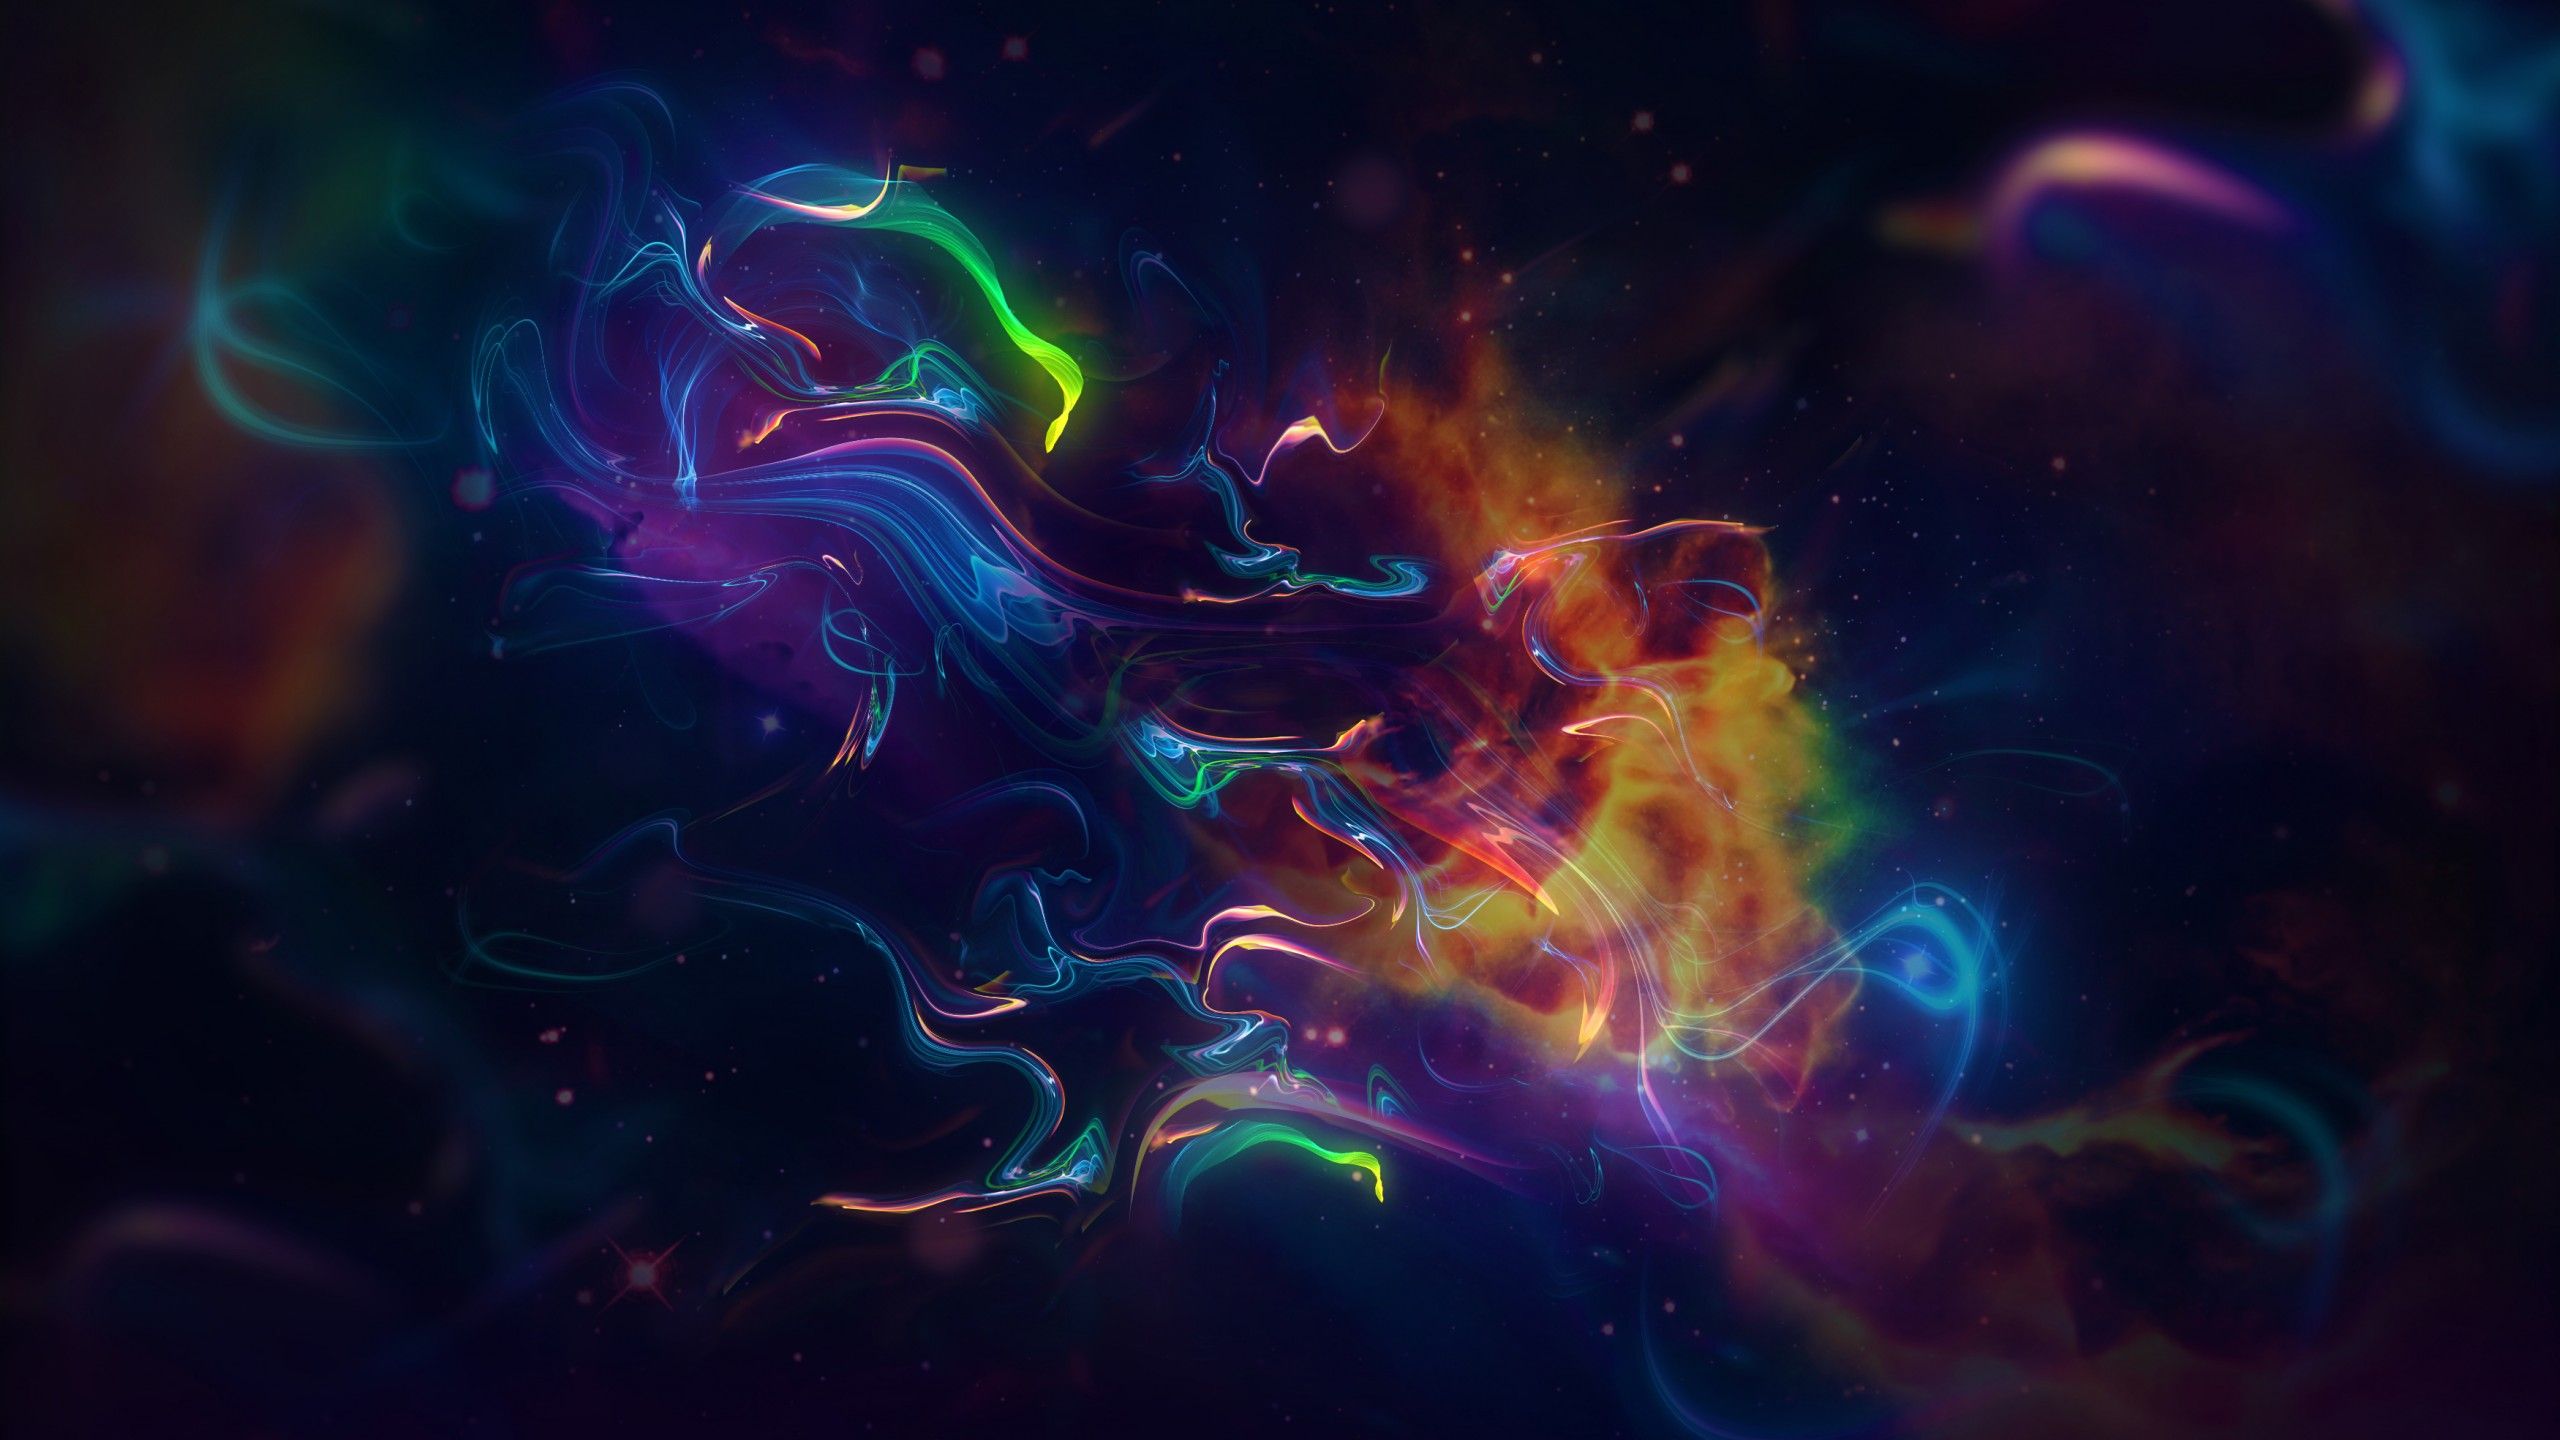 Wallpaper Smoke, Colorful, Space, Nebula, Digital art, 4K, Abstract,. Wallpaper for iPhone, Android, Mobile and Desktop